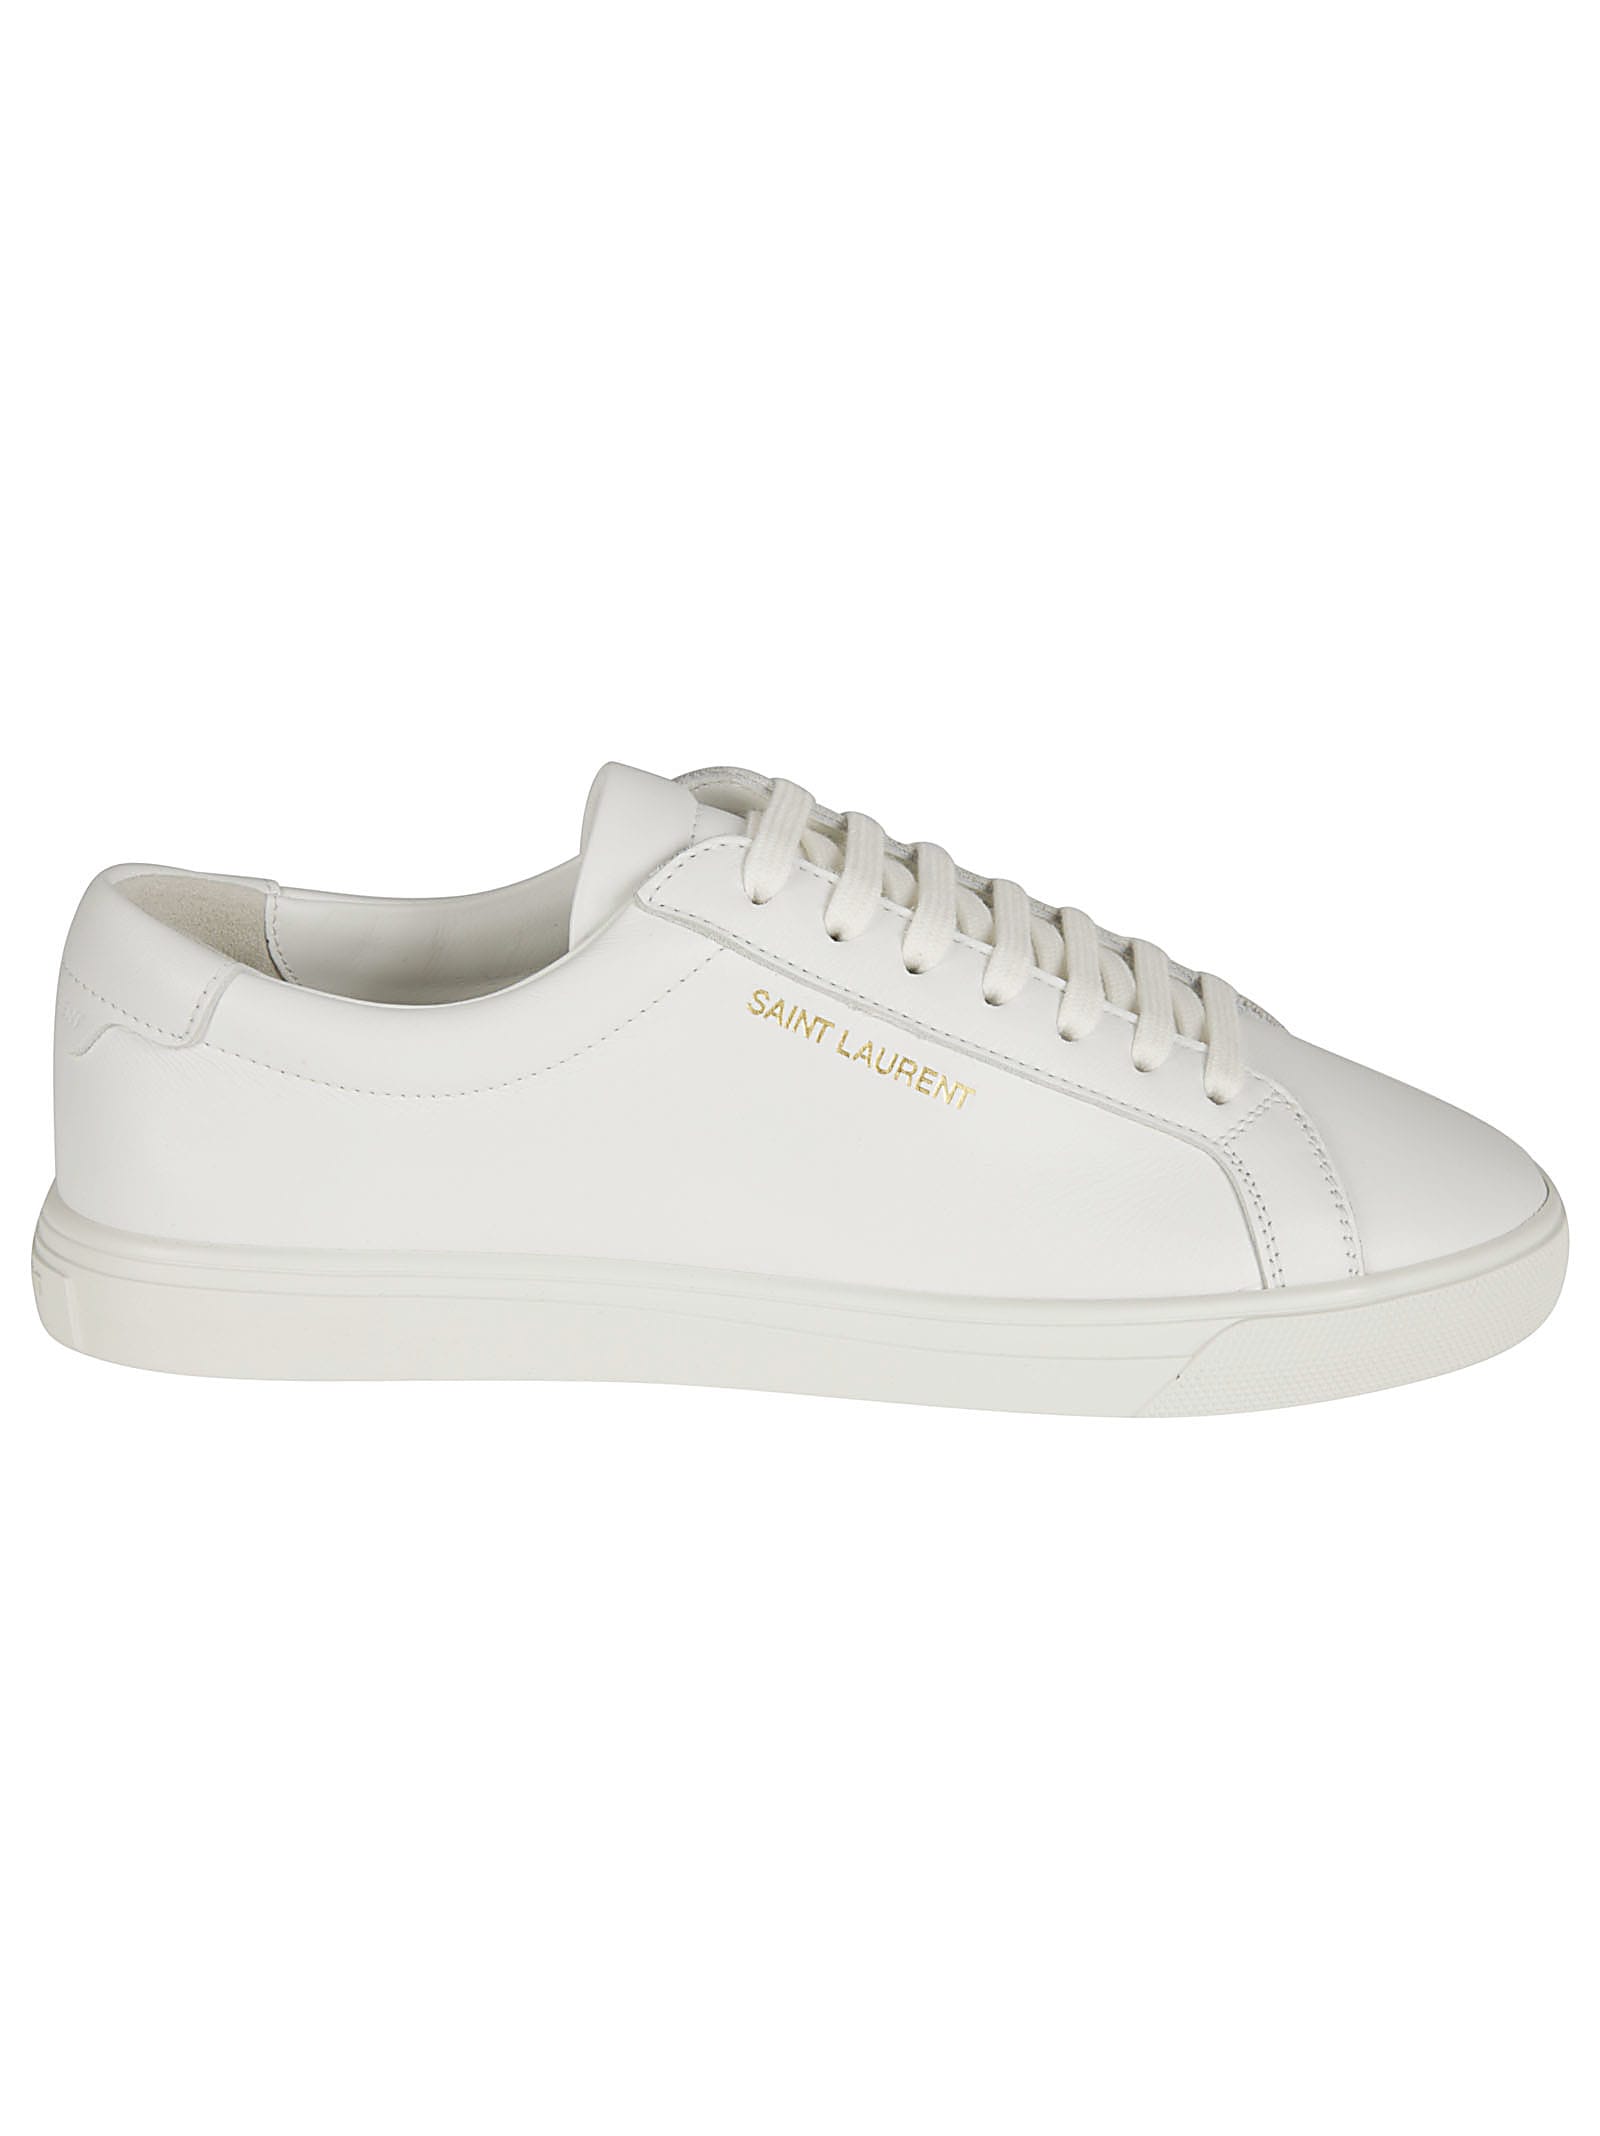 Buy Saint Laurent Andy Low Top Sneakers online, shop Saint Laurent shoes with free shipping